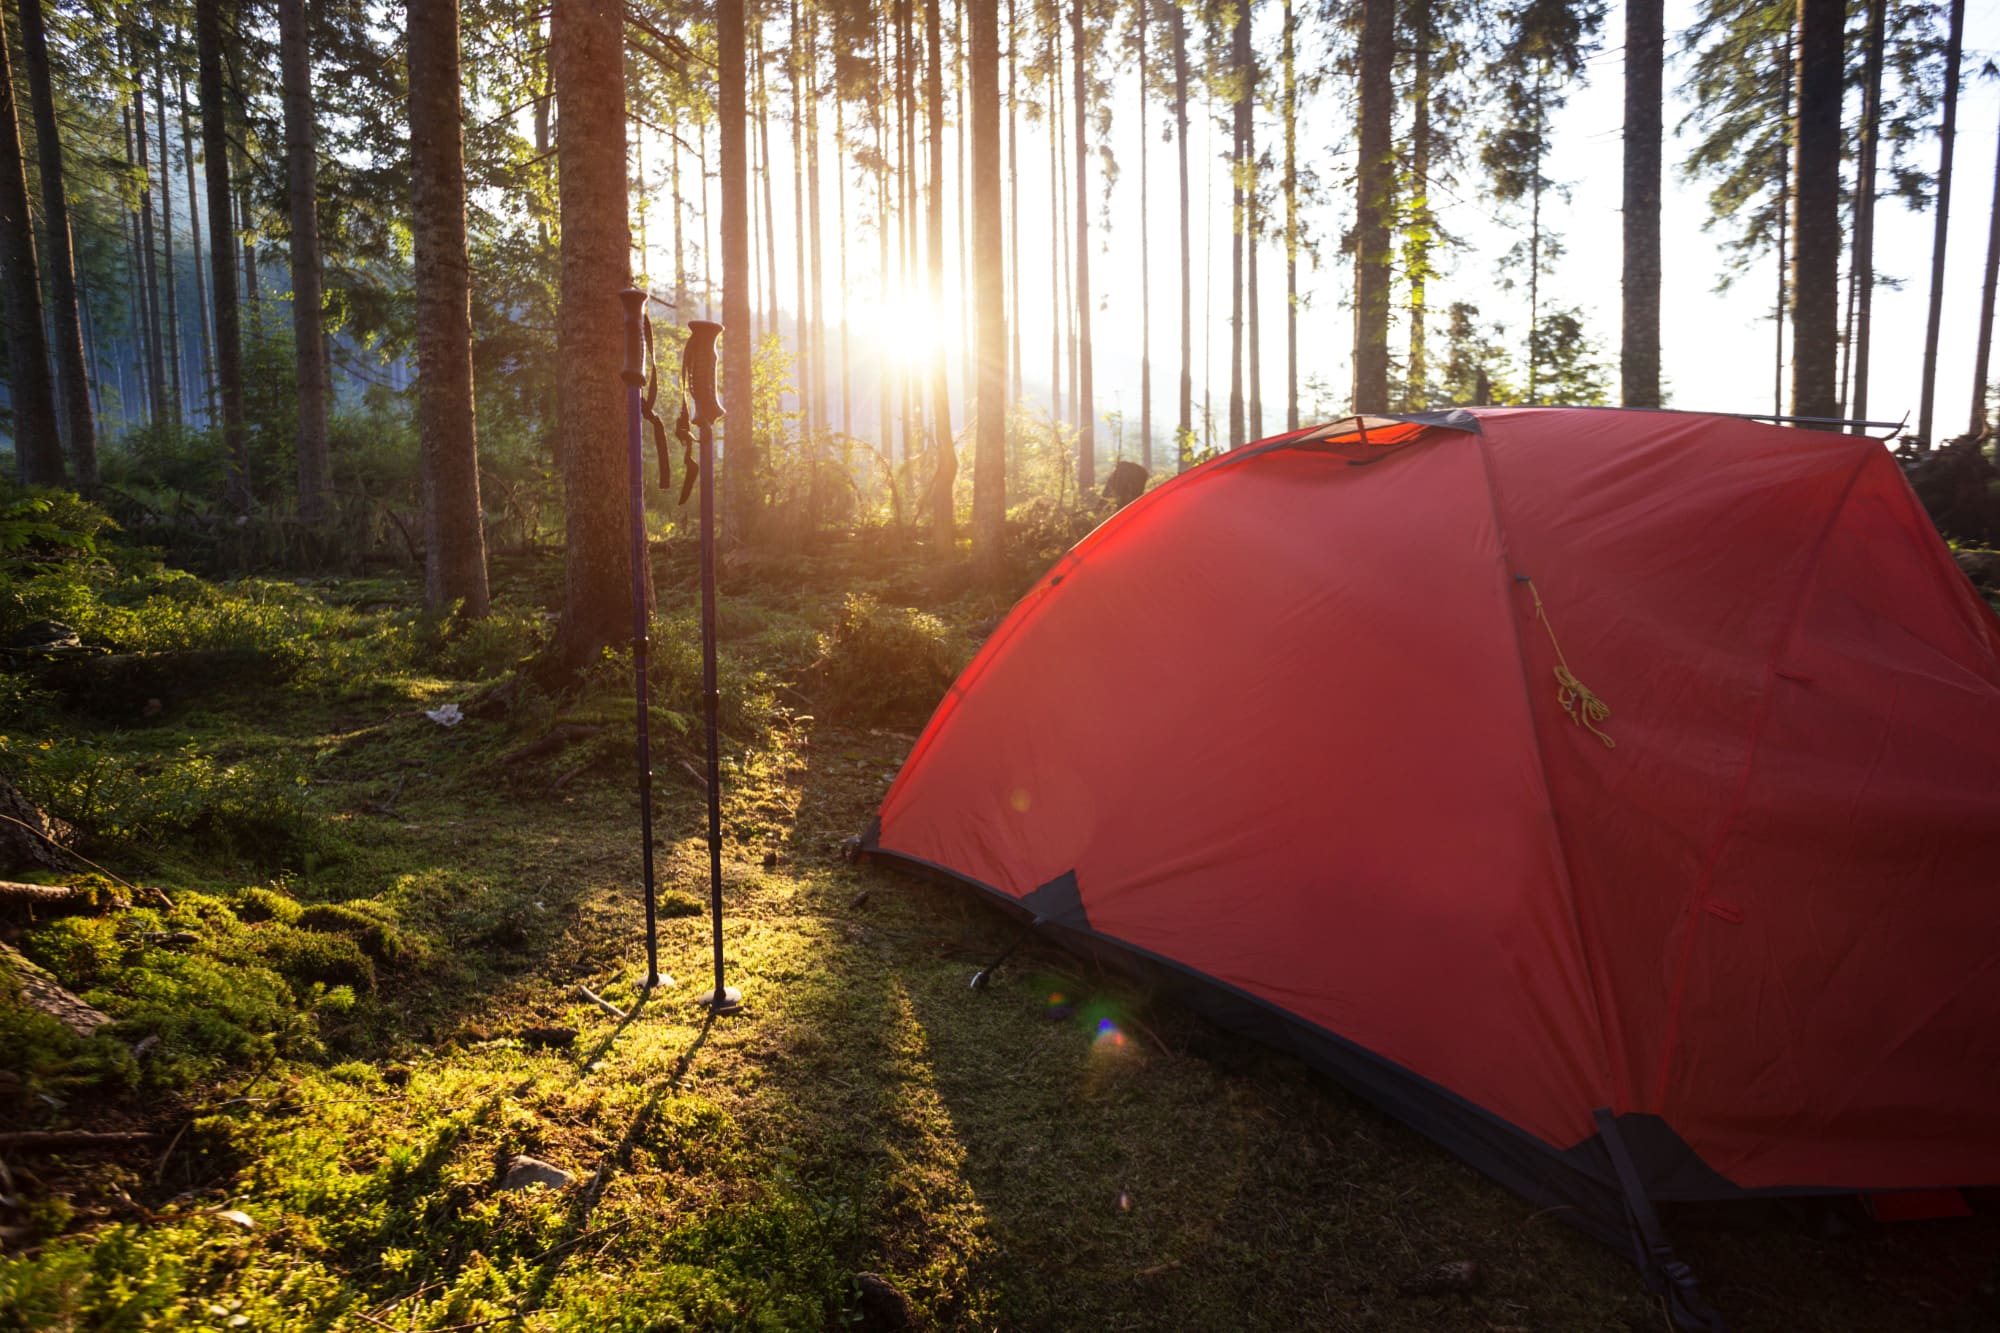 A red tent set up on mossy forest ground beside a pair of hiking poles with the sunlight shining through the trees.